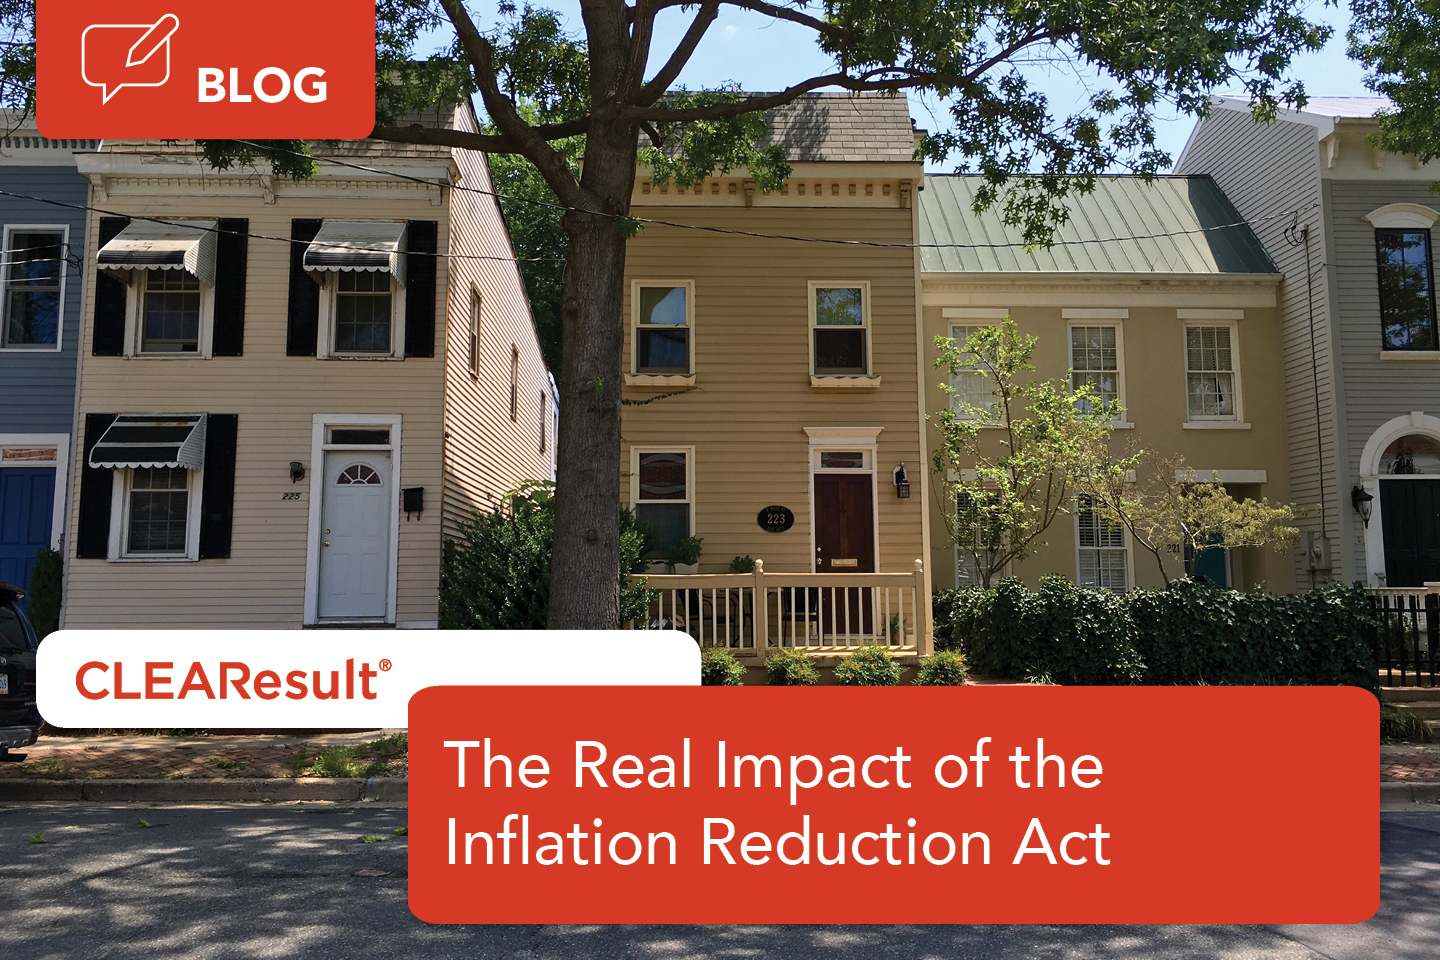 How much different households may save with Inflation Reduction Act rebates